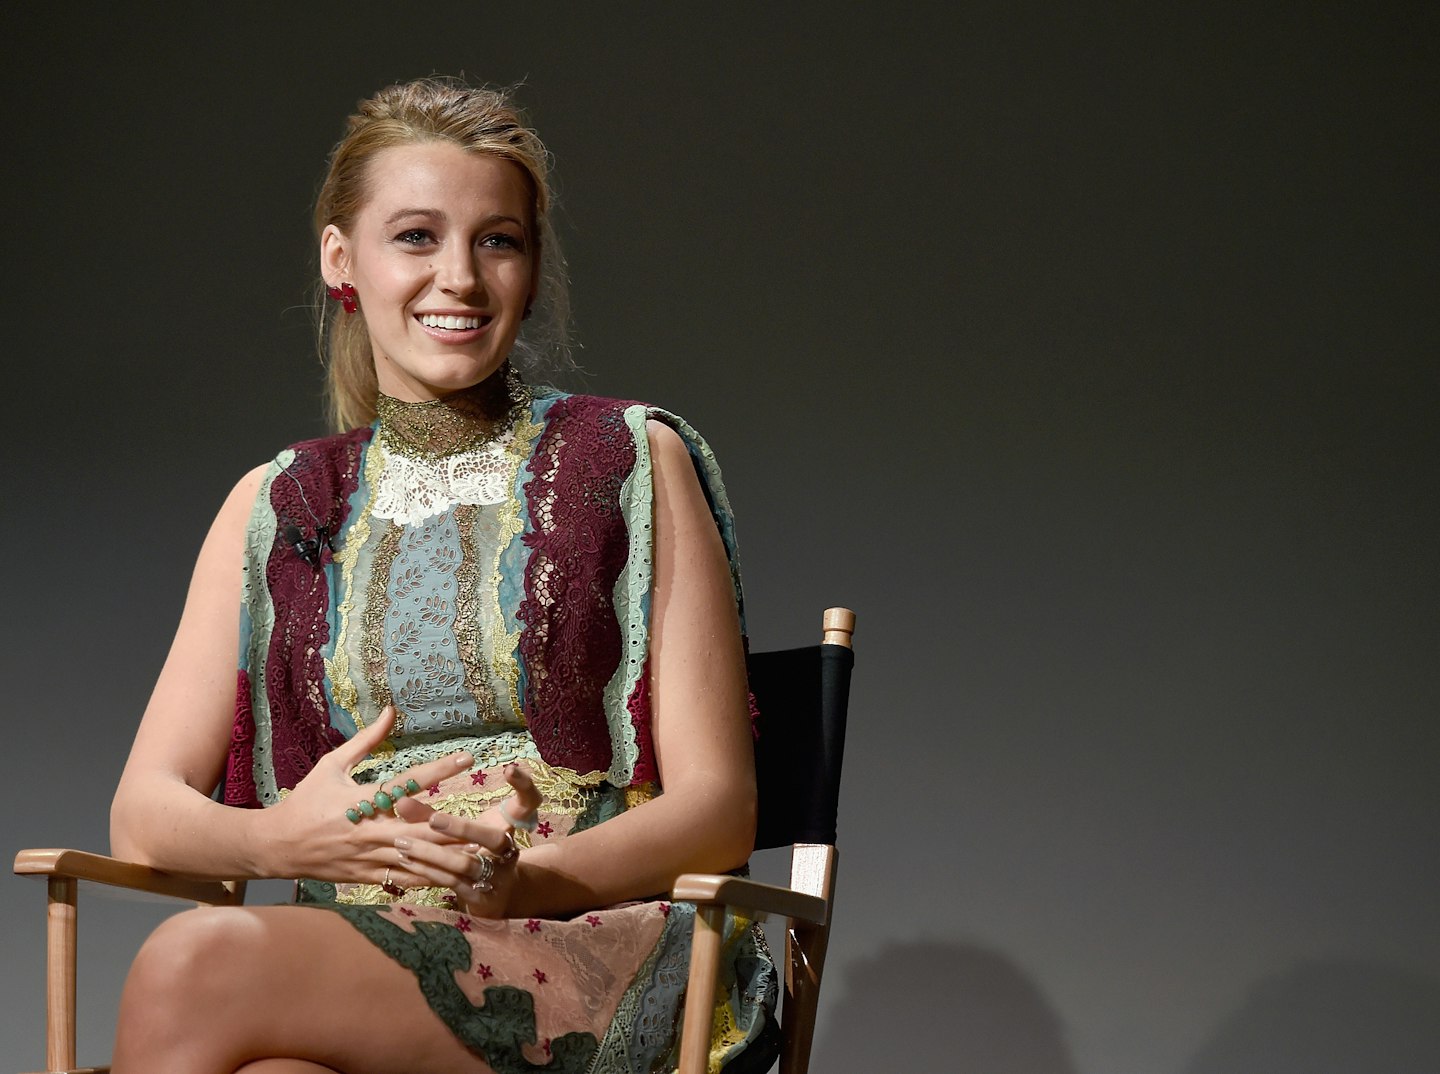 Blake Lively Takes On Shark Thriller Into The Deep